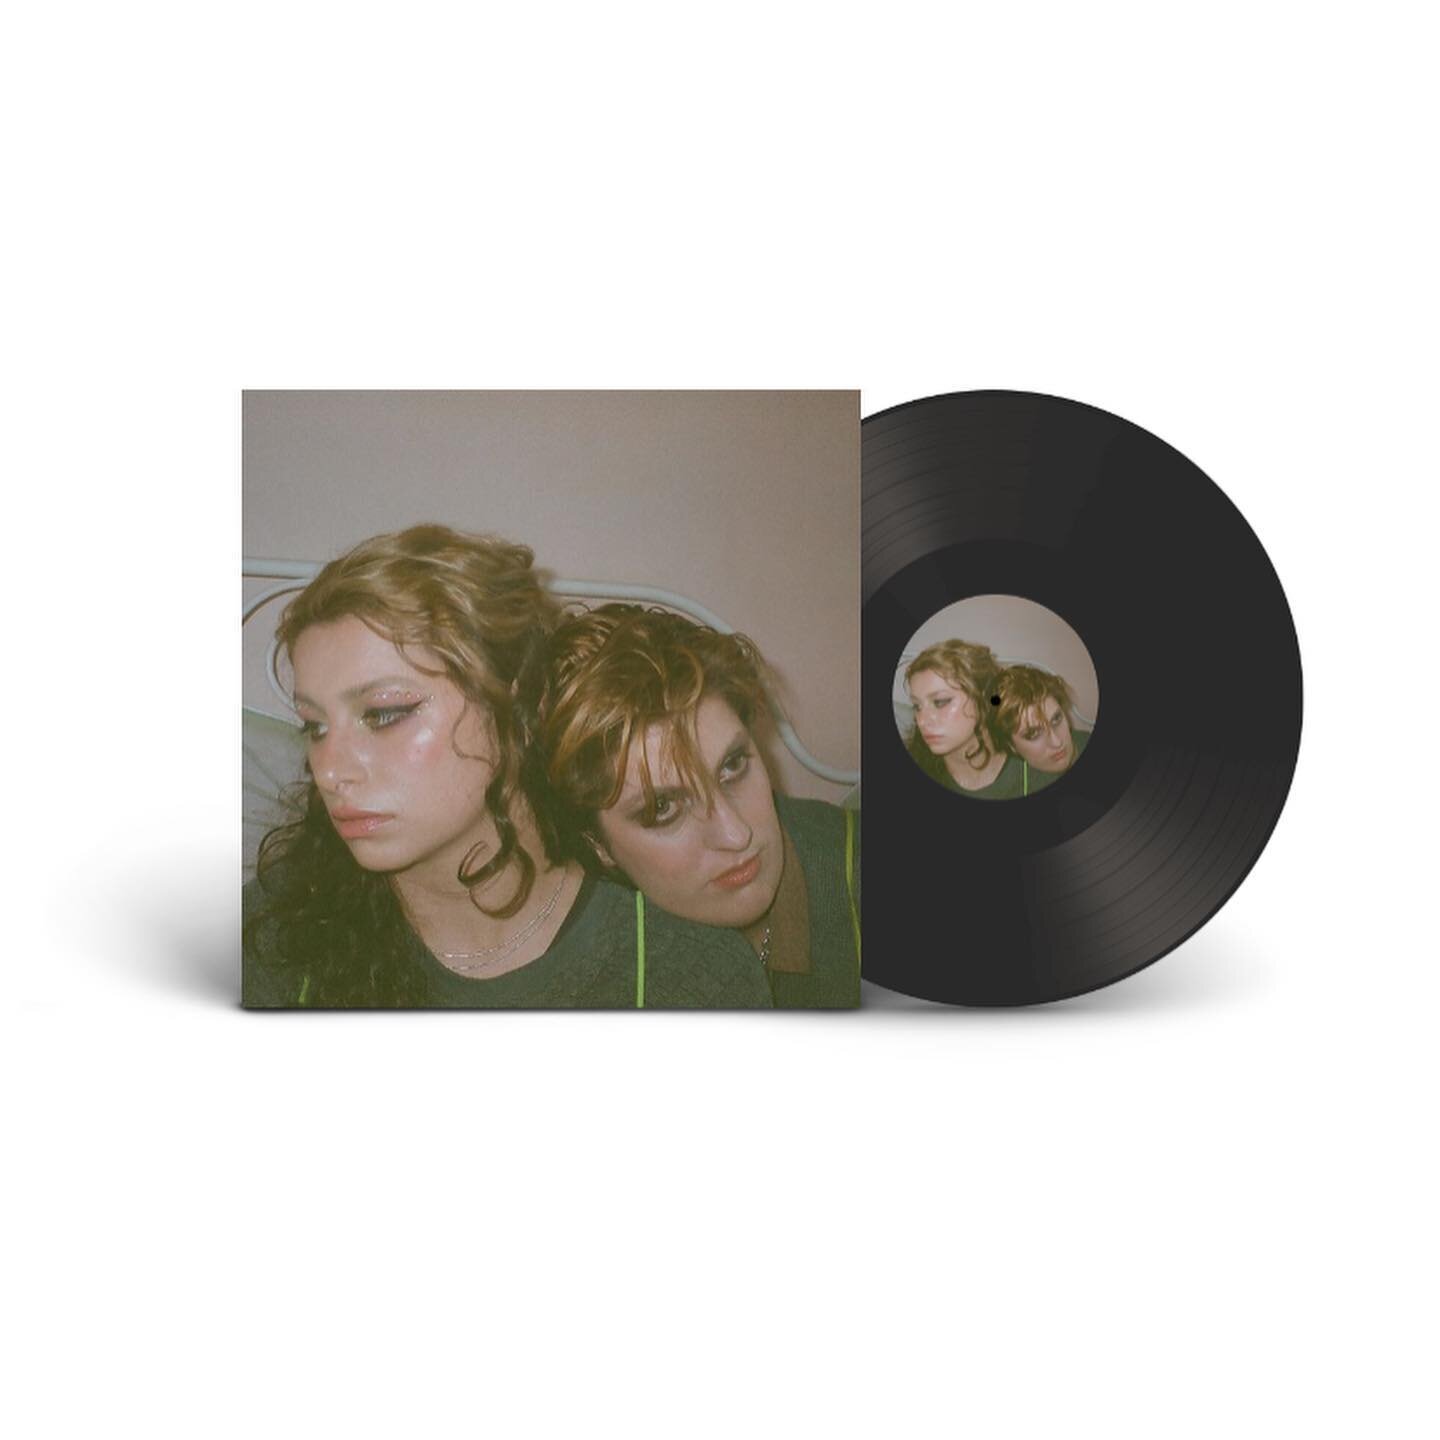 we&rsquo;re all gonna die is on vinyl ?!!! it&rsquo;s limited so get them while they&rsquo;re hot pls ❤️&zwj;🔥 also superstar hit 500k, im so grateful 4 u all, link in bio let&rsquo;s rock 🦷